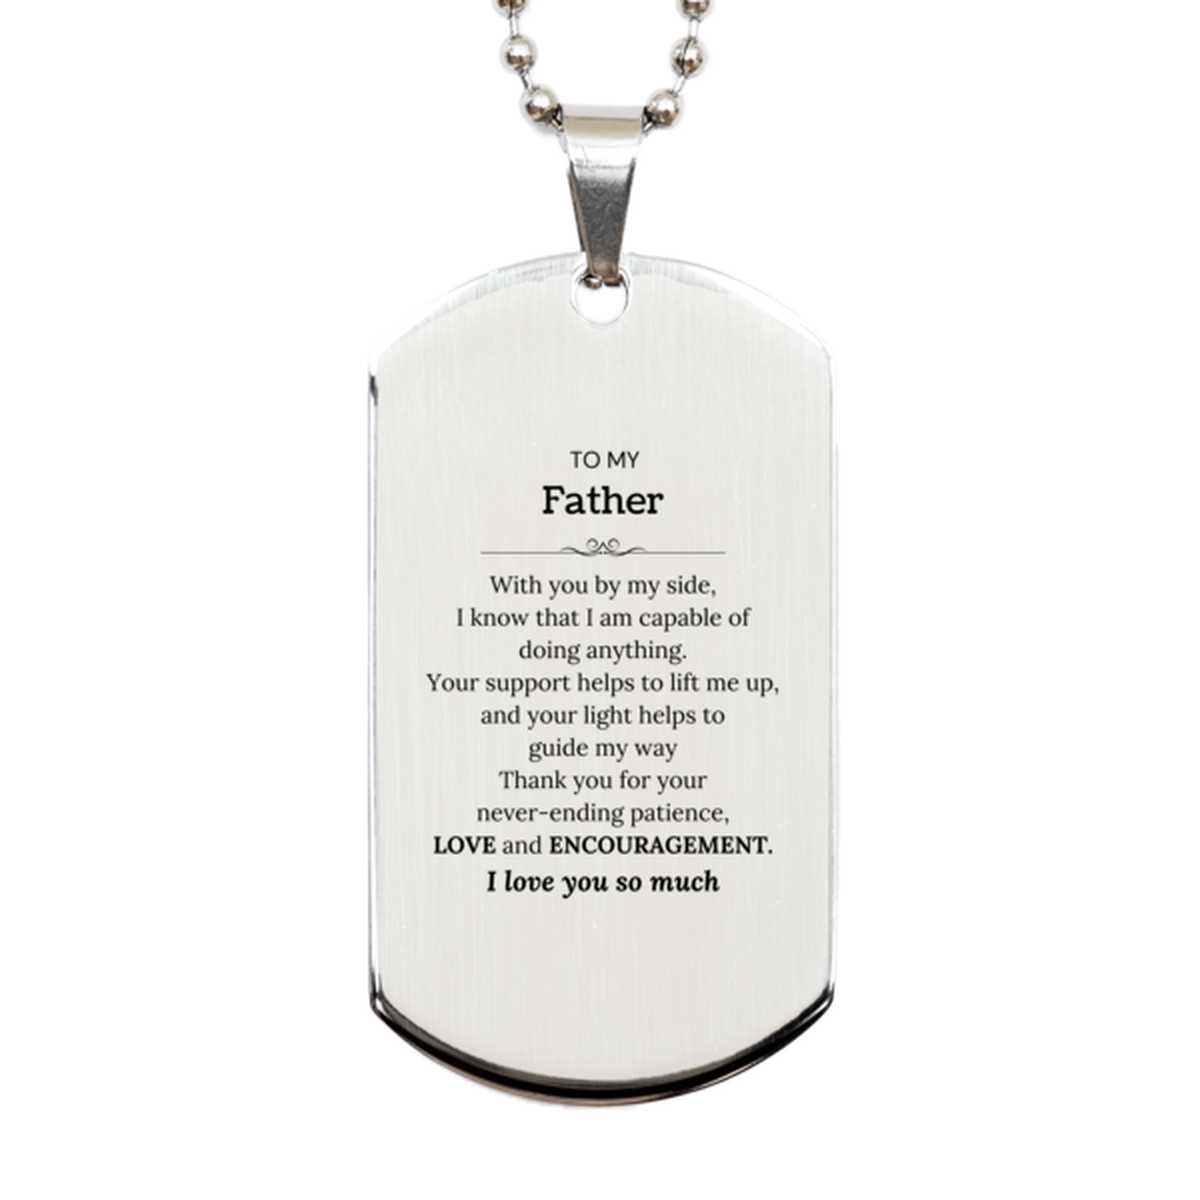 Appreciation Father Silver Dog Tag Gifts, To My Father Birthday Christmas Wedding Keepsake Gifts for Father With you by my side, I know that I am capable of doing anything. I love you so much